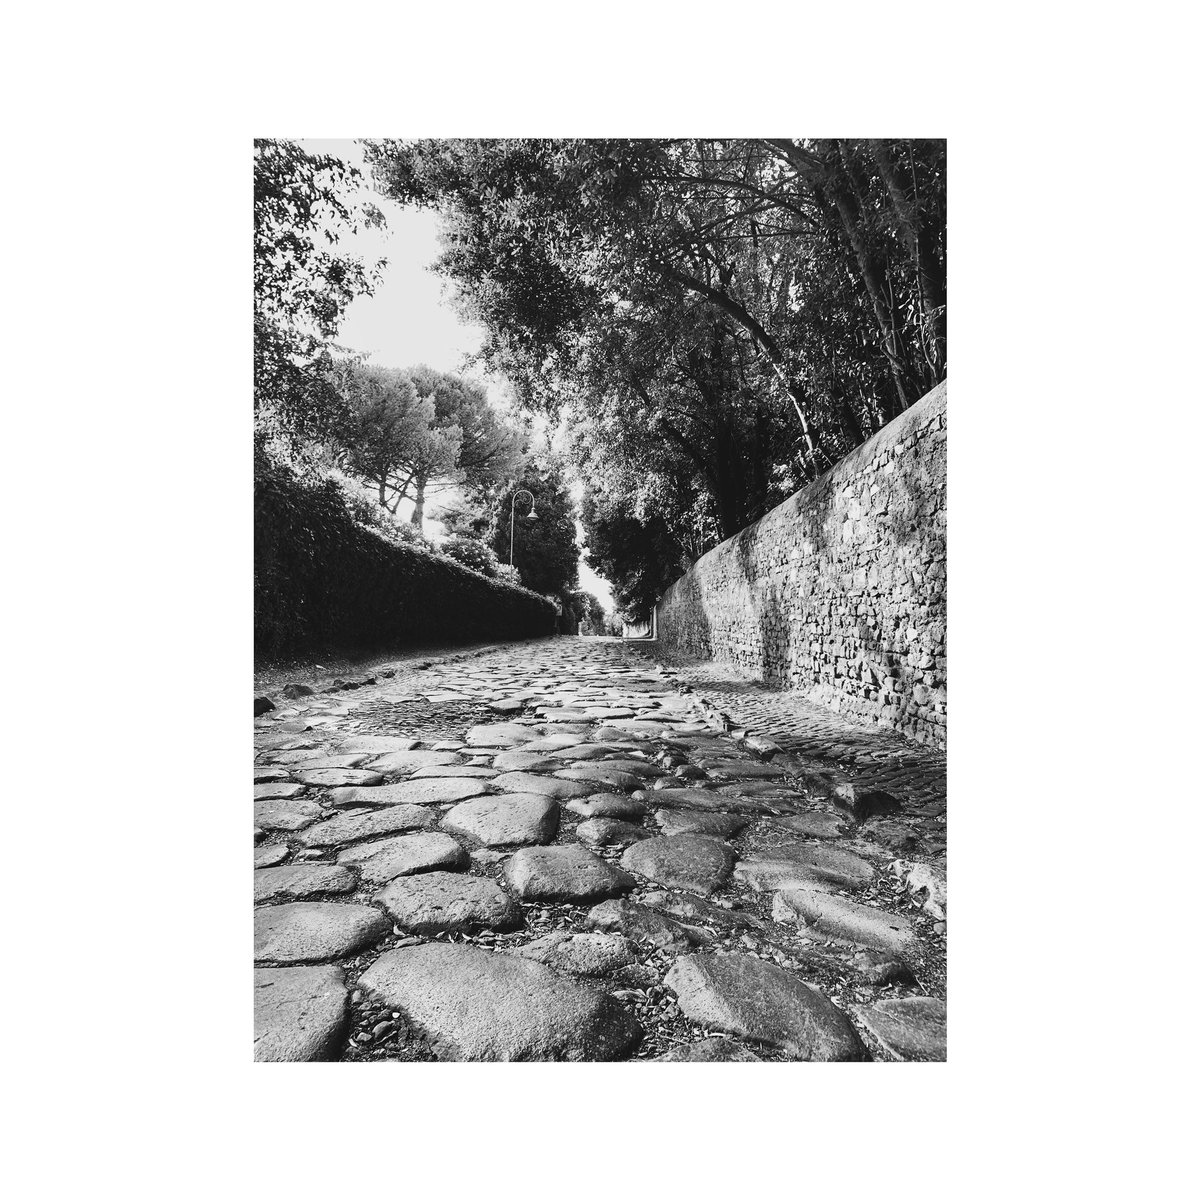 'The happiness of your life depends upon the quality of your thoughts.'
Marcus Aurelius

#marcusaurelius #motivationalquotes #lifequotes #reginaviarum #ancientappialandscapes #appiaantica #rome #romephotowalk #romephotography #blackandwhite 
#meditation